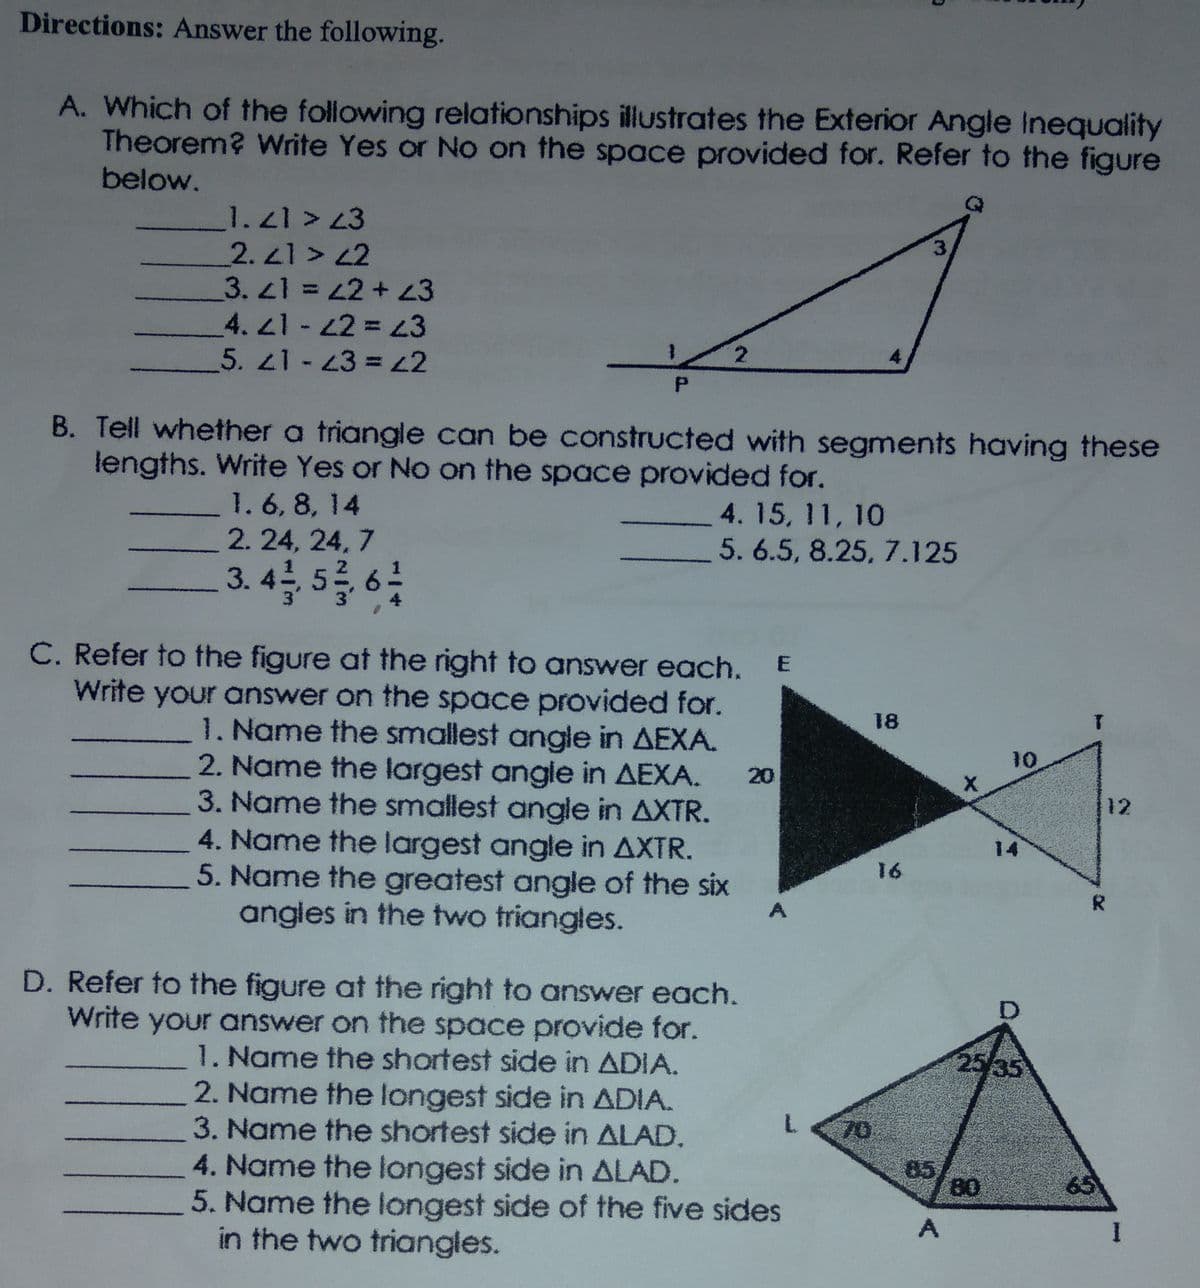 Directions: Answer the following.
A. Which of the following relationships illustrates the Exterior Angle Inequality
Theorem? Write Yes or No on the space provided for. Refer to the figure
below.
1.21 >3
2.21 > 42
3. 1 = 2+ 43
4. 21- 22 = 3
5. 21-43 = 2
4
B. Tell whether a triangle can be constructed with segments having these
lengths. Write Yes or No on the space provided for.
1.6, 8, 14
2. 24, 24, 7
4. 15, 11, 10
5. 6.5, 8.25, 7.125
3.4 5를 성
C. Refer to the figure at the right to answer each.
Write your answer on the space provided for.
1. Name the smallest angle in AEXA.
2. Name the largest angle in AEXA.
3. Name the smallest angle in AXTR.
4. Name the largest angle in AXTR.
5. Name the greatest angle of the six
angles in the two triangles.
18
10
20
12
14
16
R
D. Refer to the figure at the right to answer each.
Write your answer on the space provide for.
1. Name the shortest side in ADIA.
2. Name the longest side in ADIA.
3. Name the shortest side in ALAD.
25/35
70
85
80
4. Name the longest side in ALAD.
5. Name the longest side of the five sides
in the two triangles.
65
A
